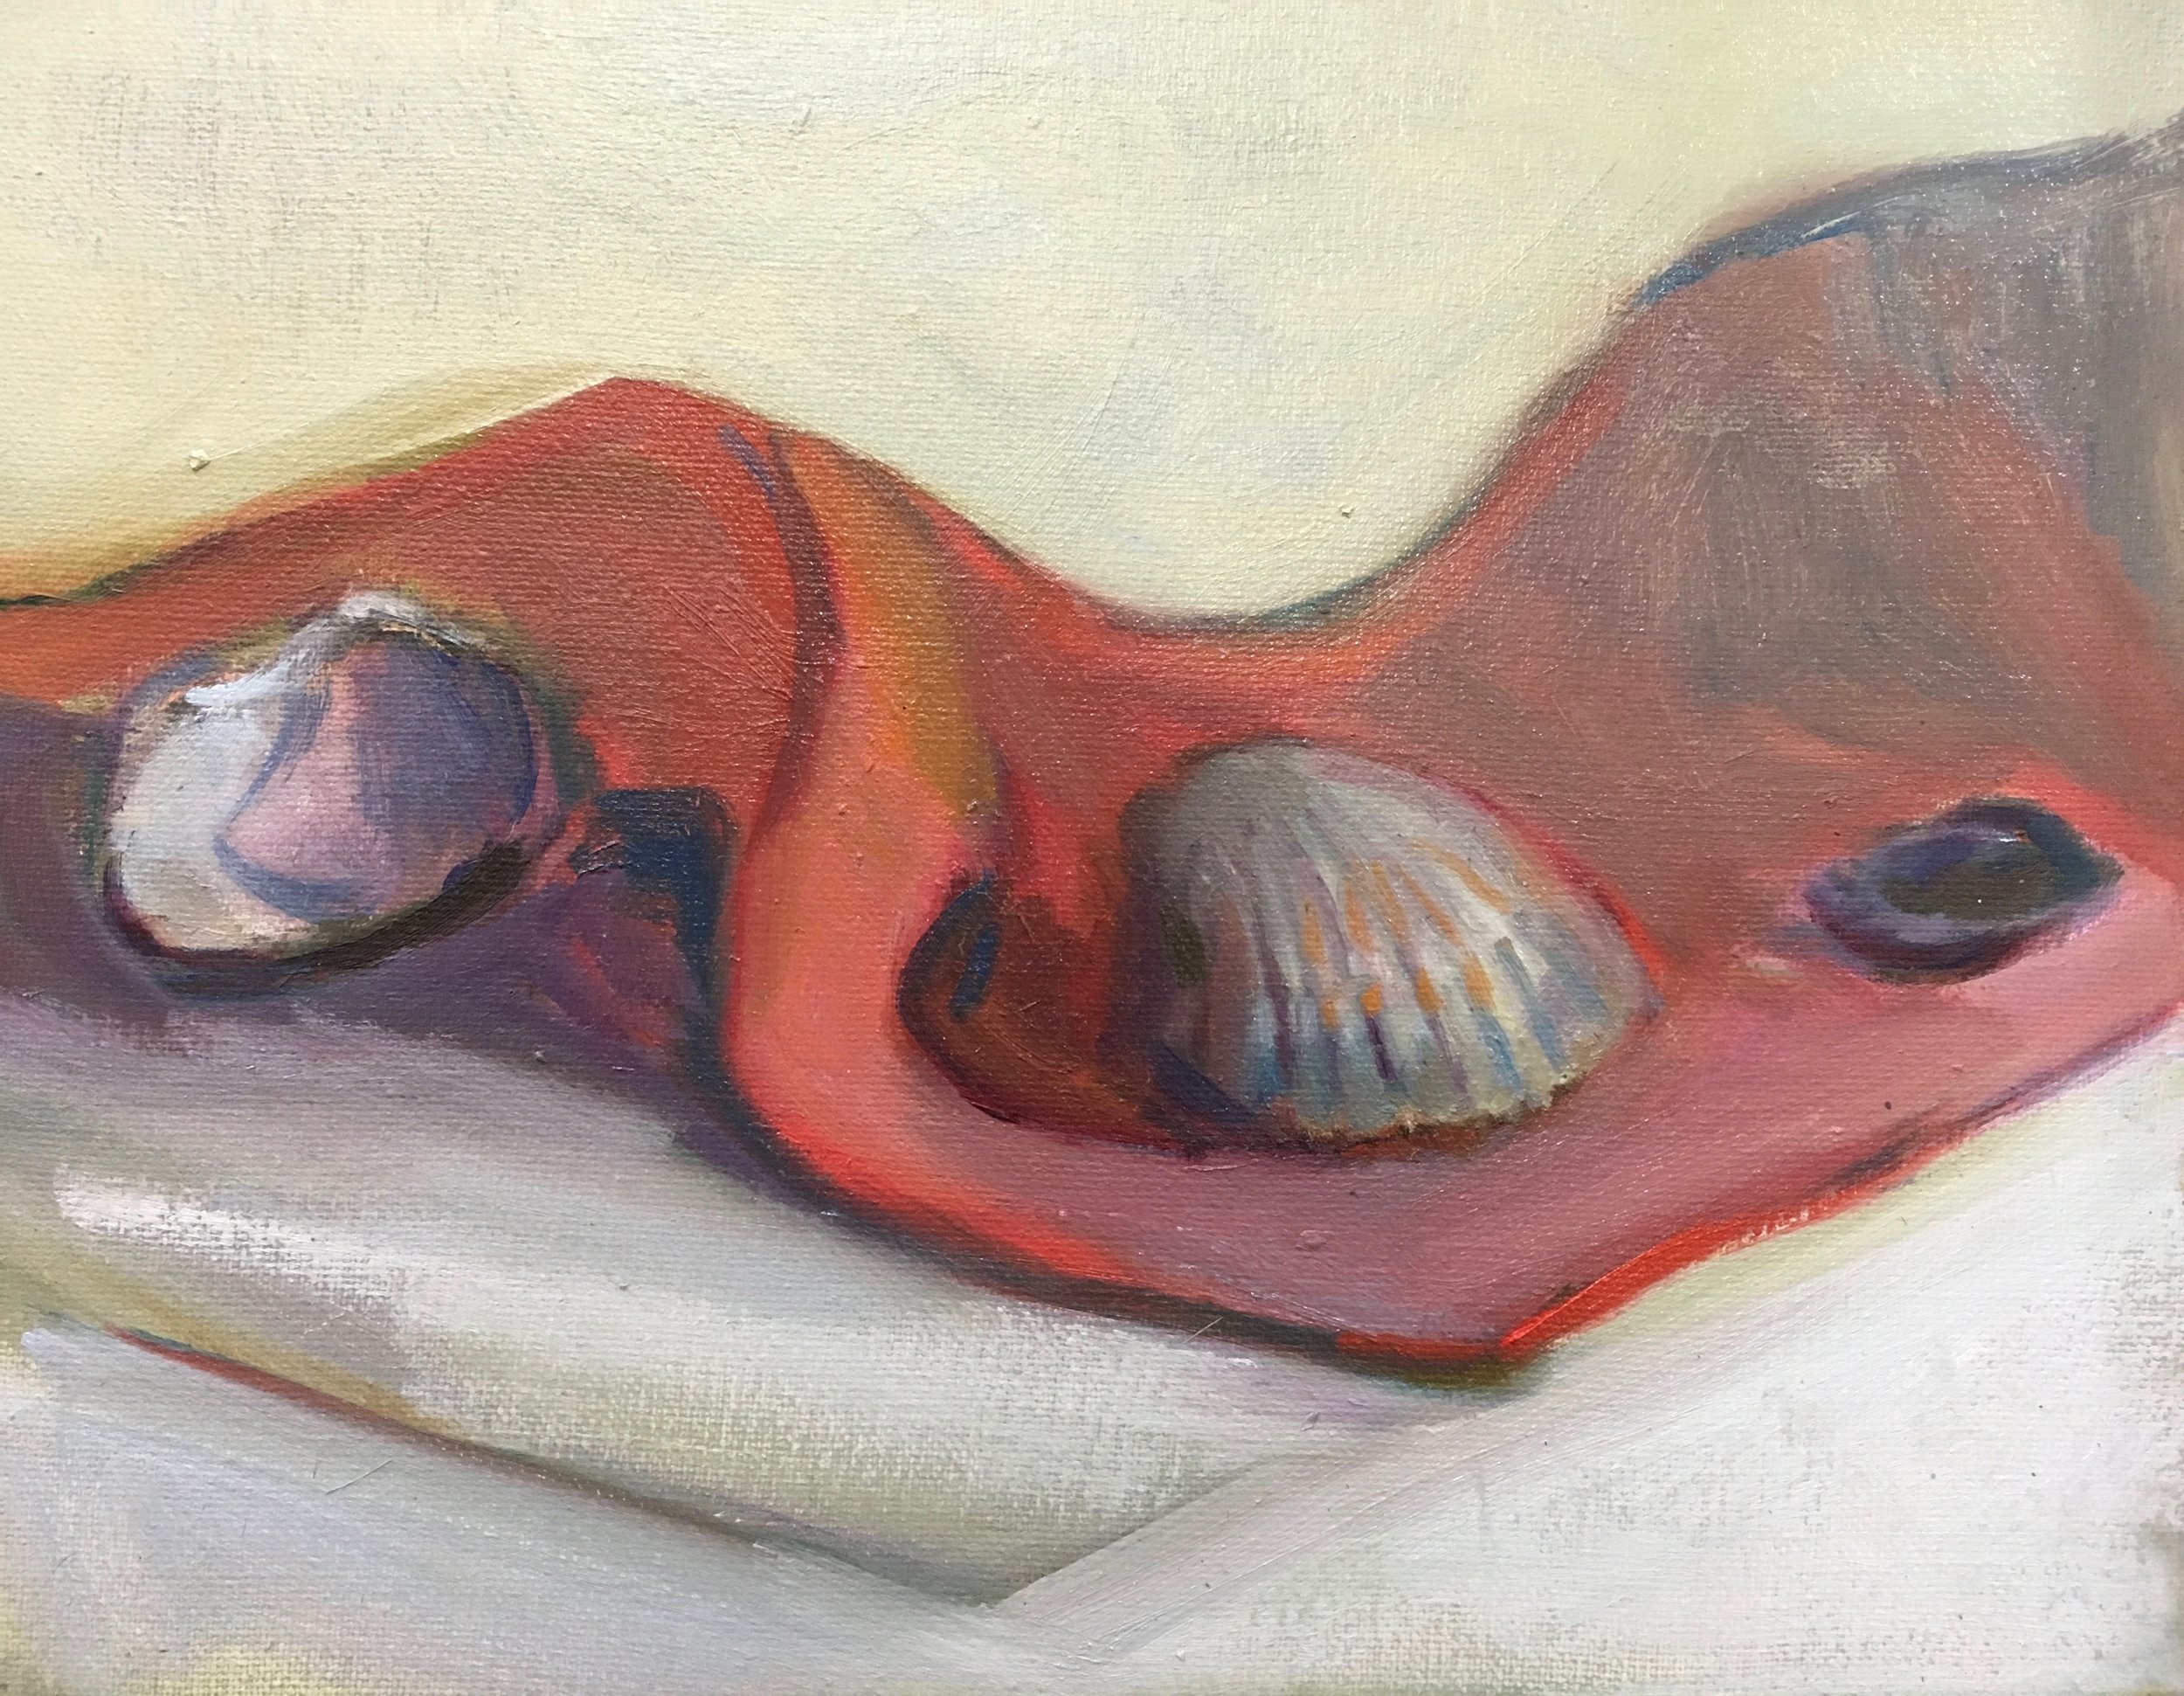 Shells on red cloth